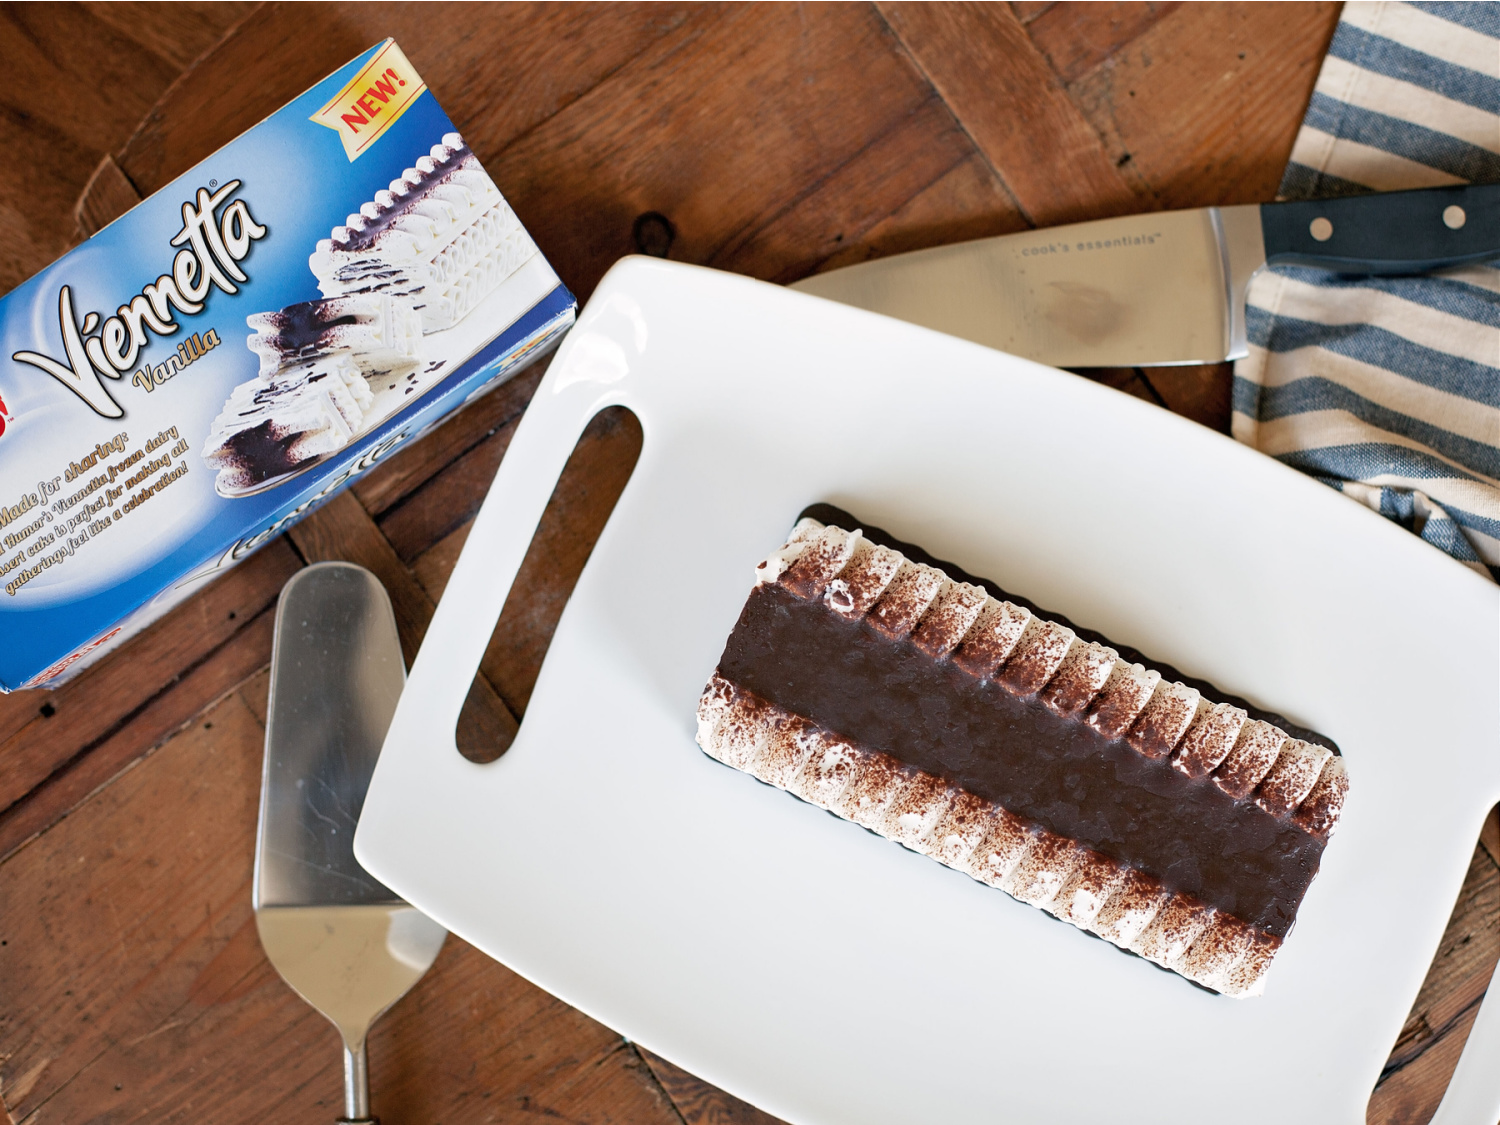 Still Time To Save On NEW Viennetta Cake – Load The Coupon To Save $2 At Publix